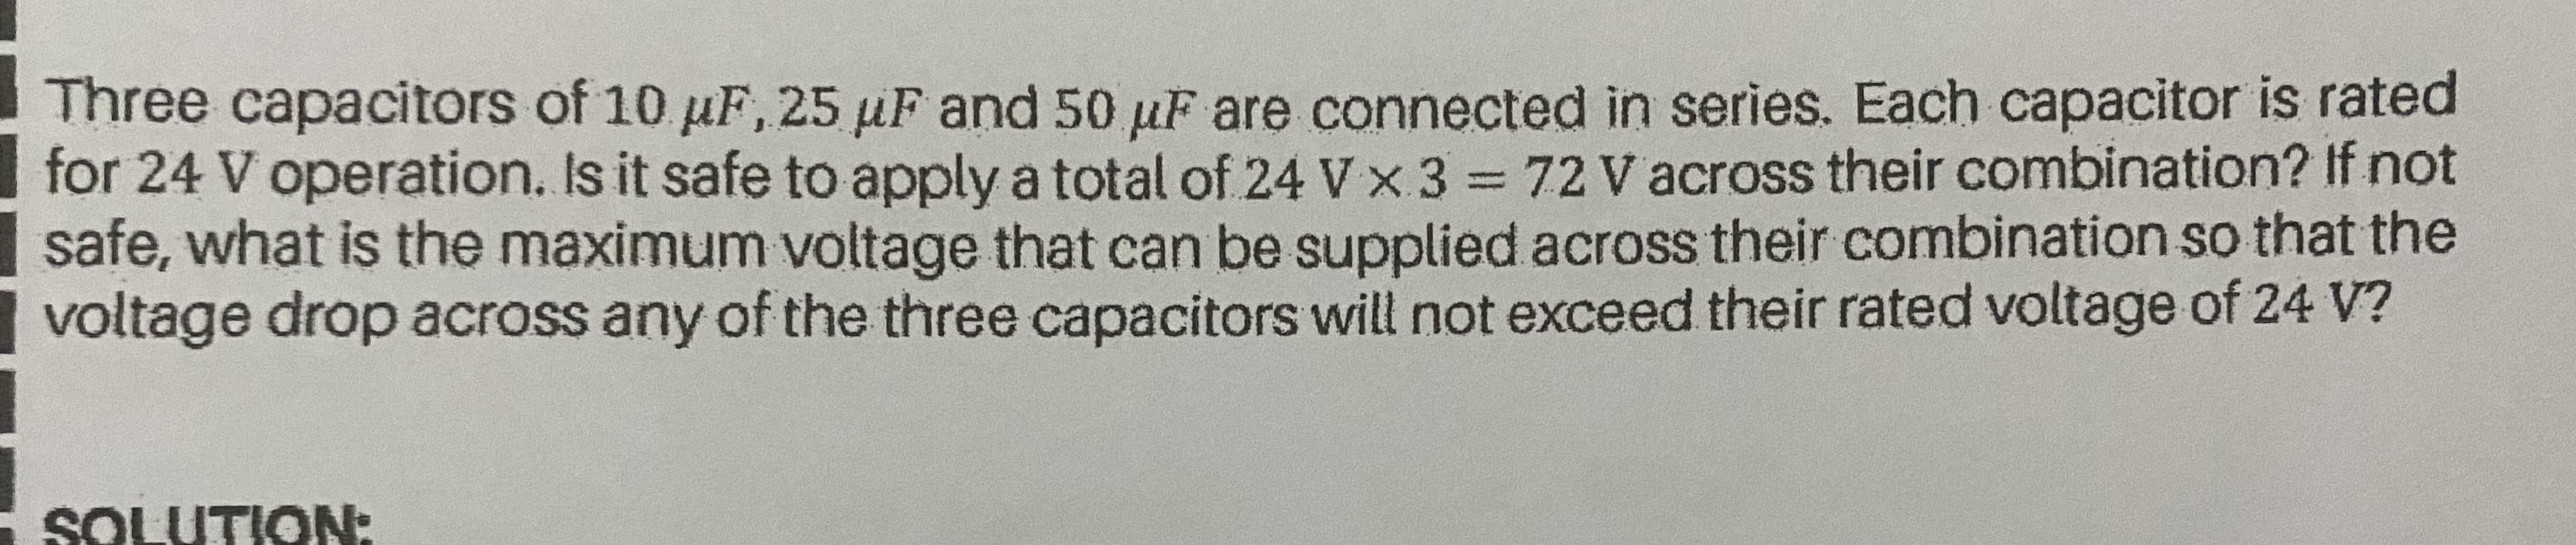 Three capacitors of 10 µF,25 µF and 50 uF are connected in series. Each capacitor is rated
for 24 V operation. Is it safe to apply a total of 24 V x 3 72 V across their combination? If not
safe, what is the maximum voltage that can be supplied across their combination so that the
voltage drop across any of the three capacitors will not exceed their rated voltage of 24 V?
%3D
SOLUTION:
